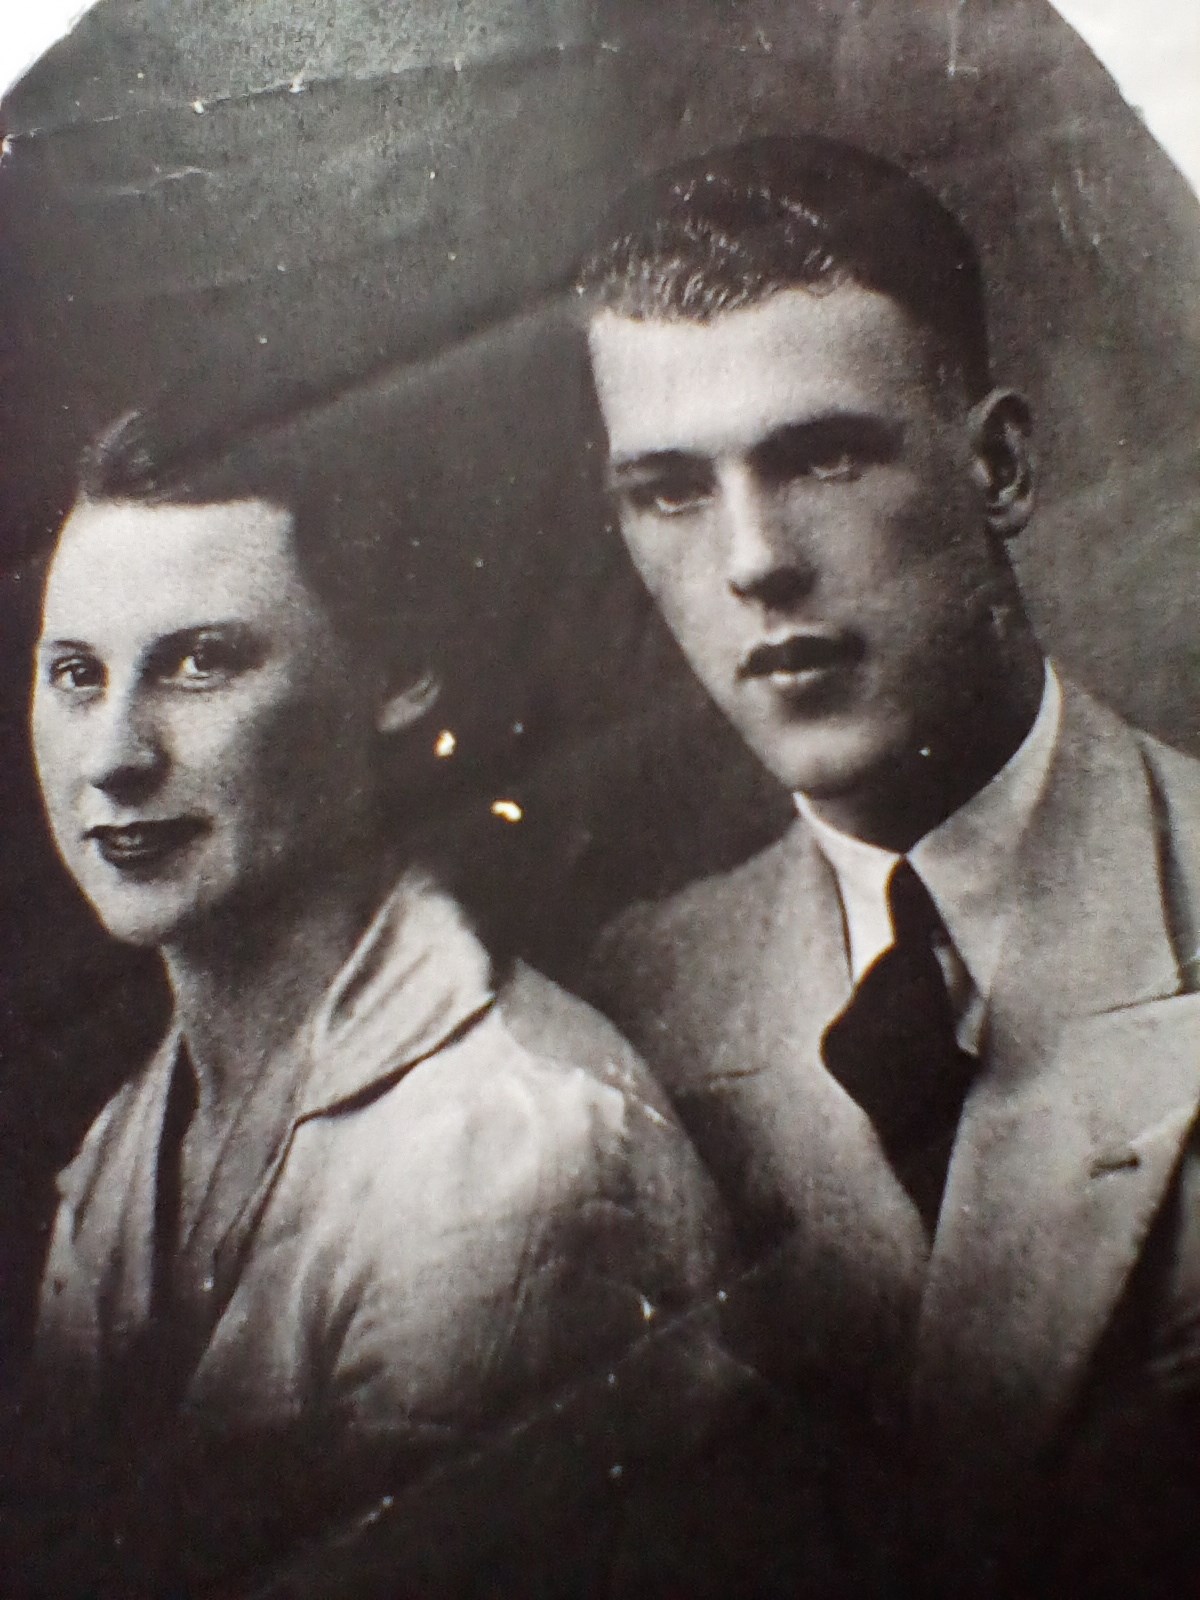 Jean with her husband Jack